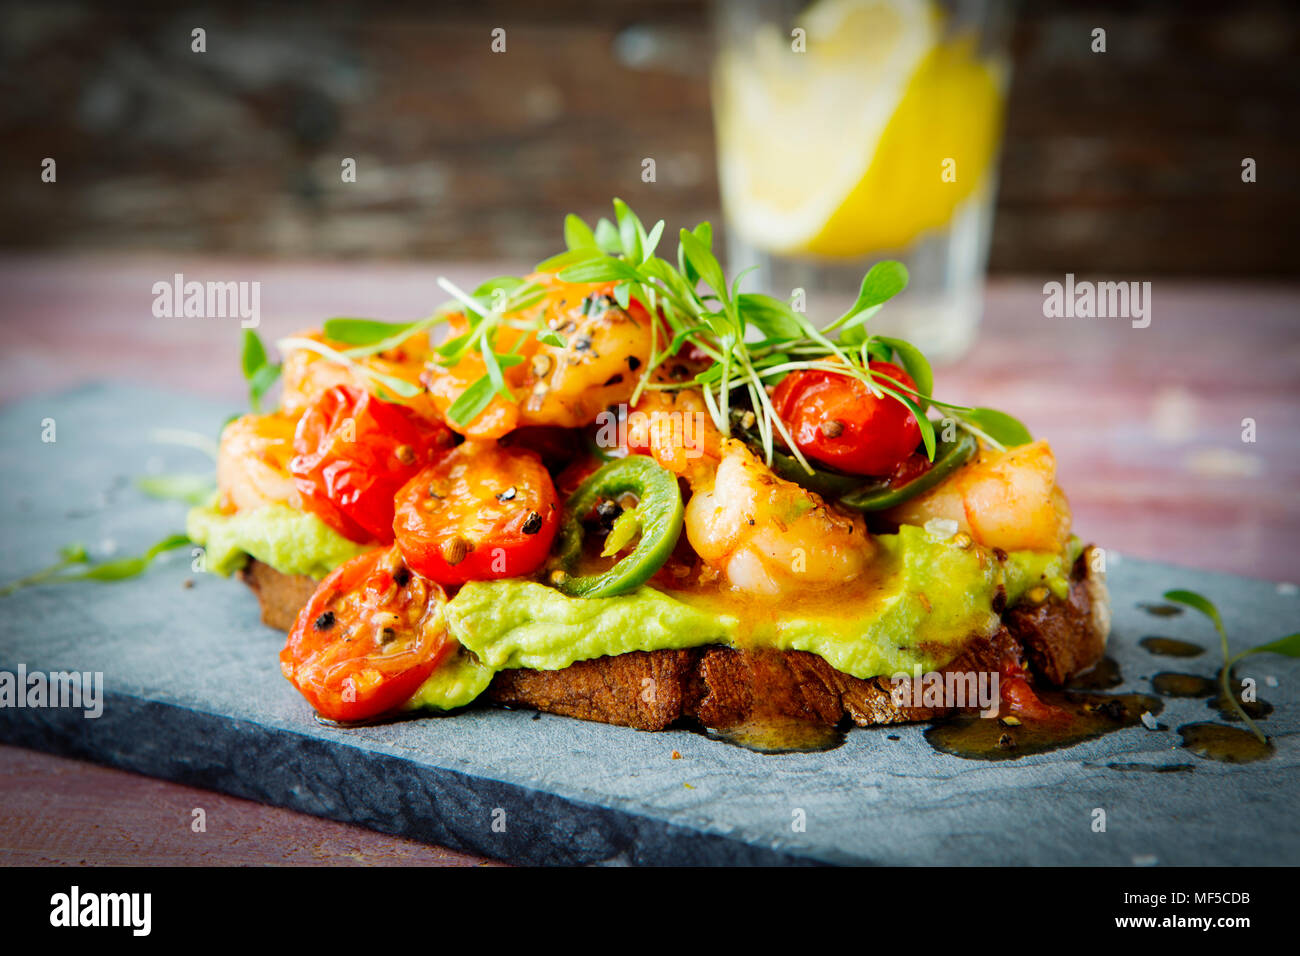 Crostini with shrimps and tomatoes, roasted bread, herbs, avocado cream, sweet chili sauce, jalapenos, cress Stock Photo